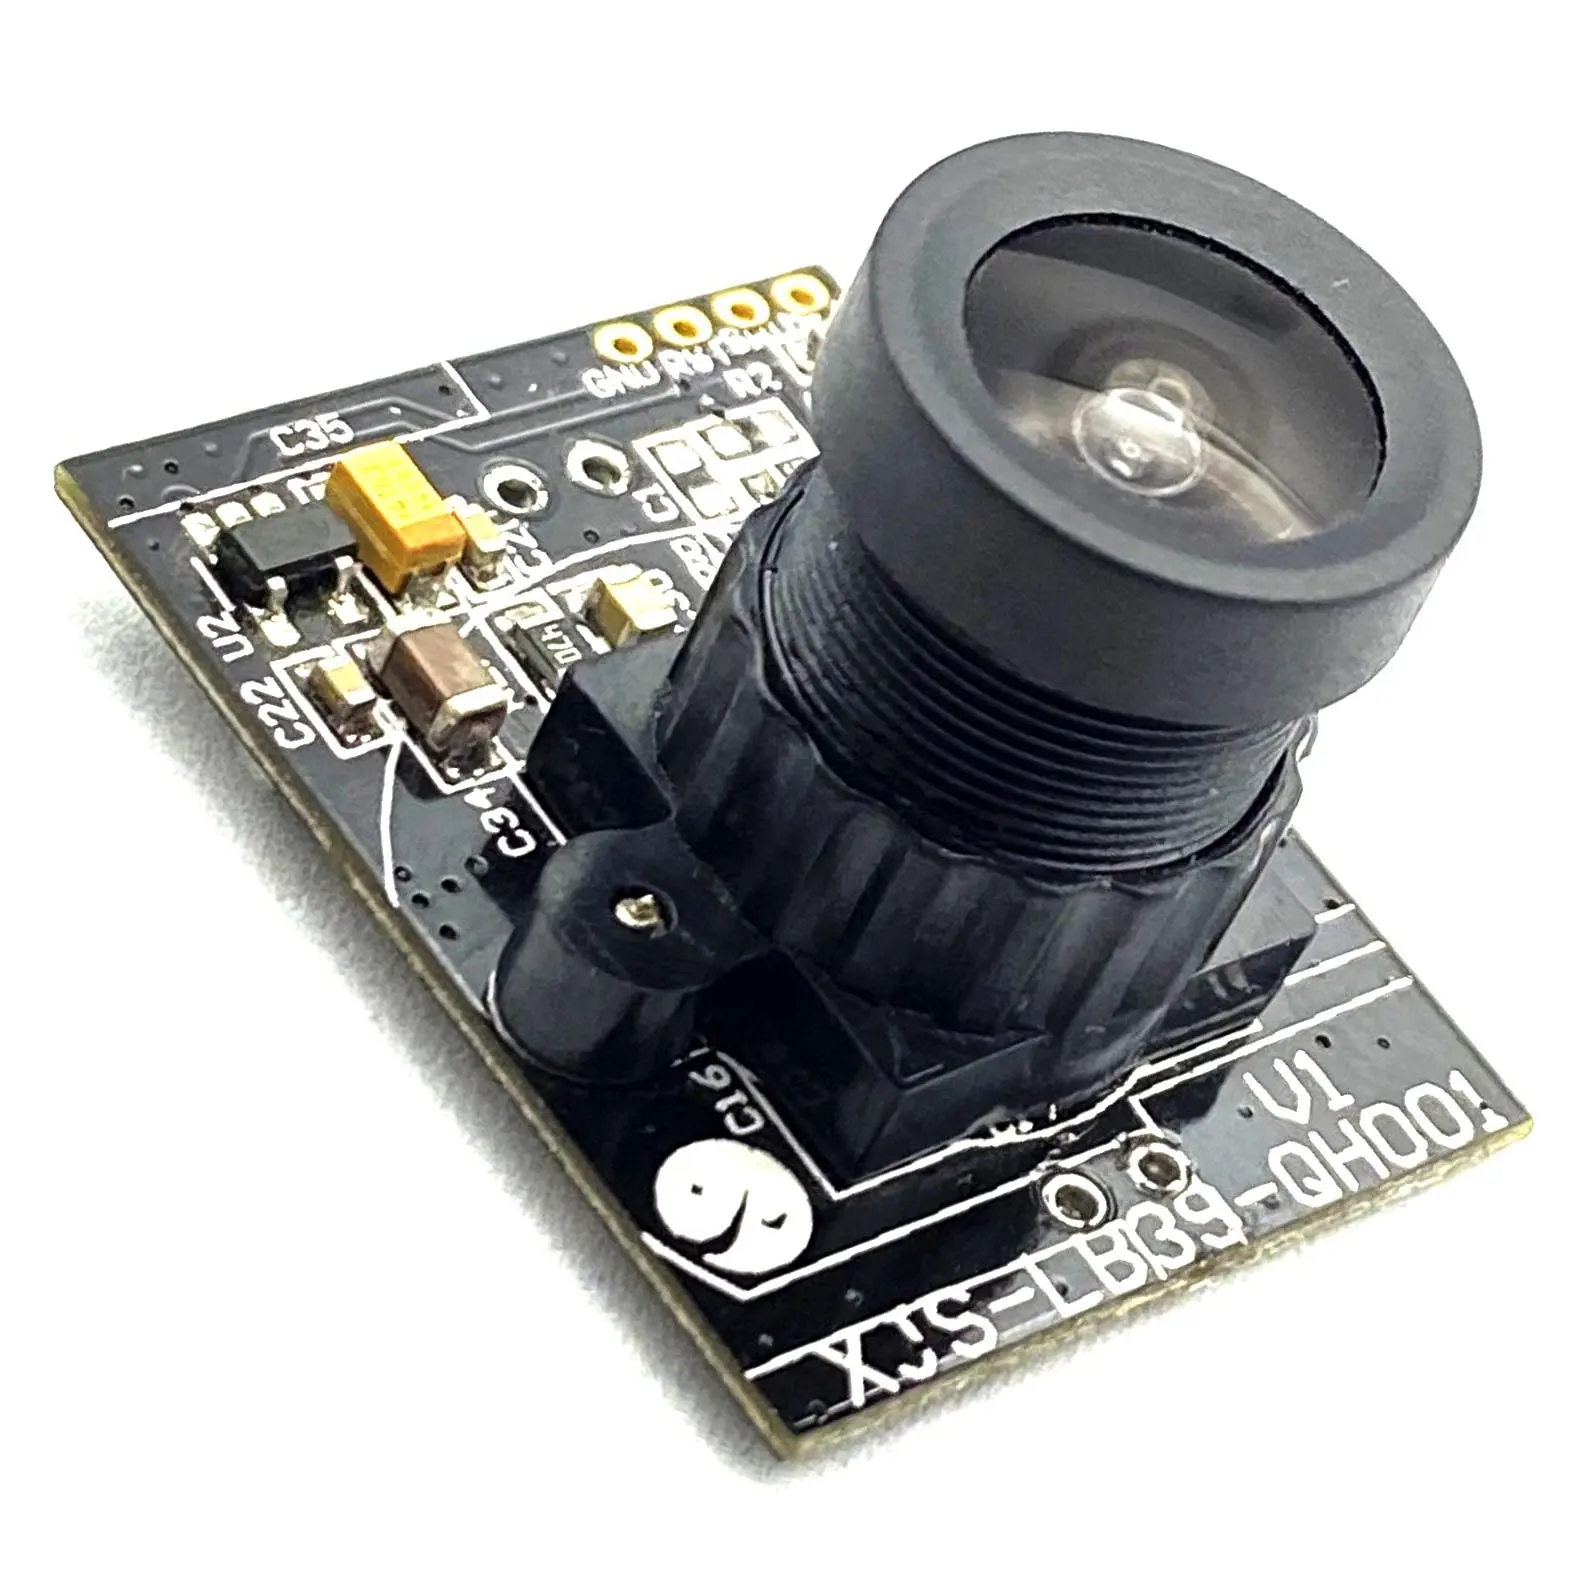 ASX340 1/4-Inch Color NTSC PAL Digital Image SOC with Overlay Processor 680TVL Analog Camera Module for video door bell